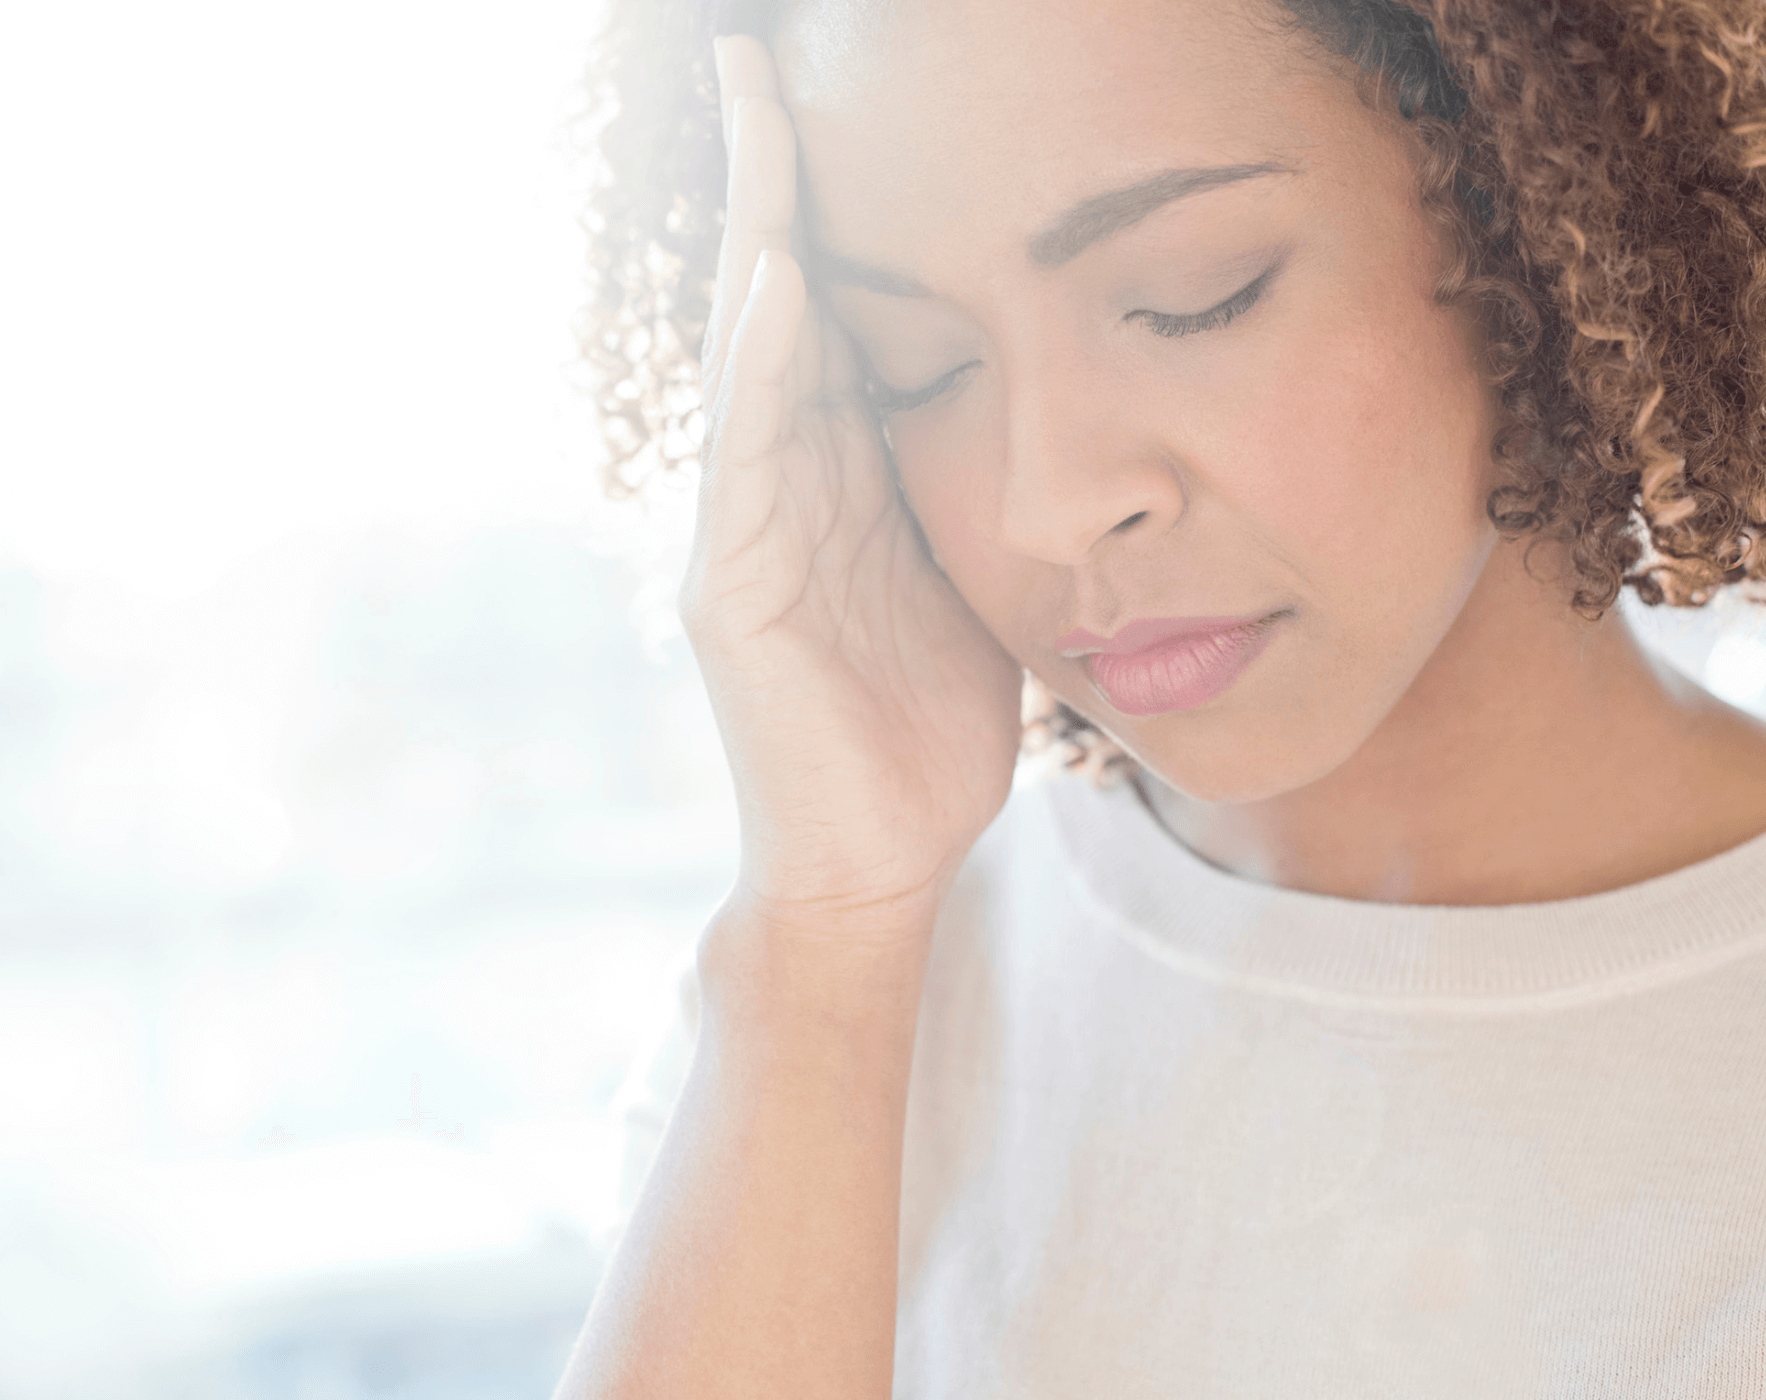 New research shows a strong connection between migraines and MS.